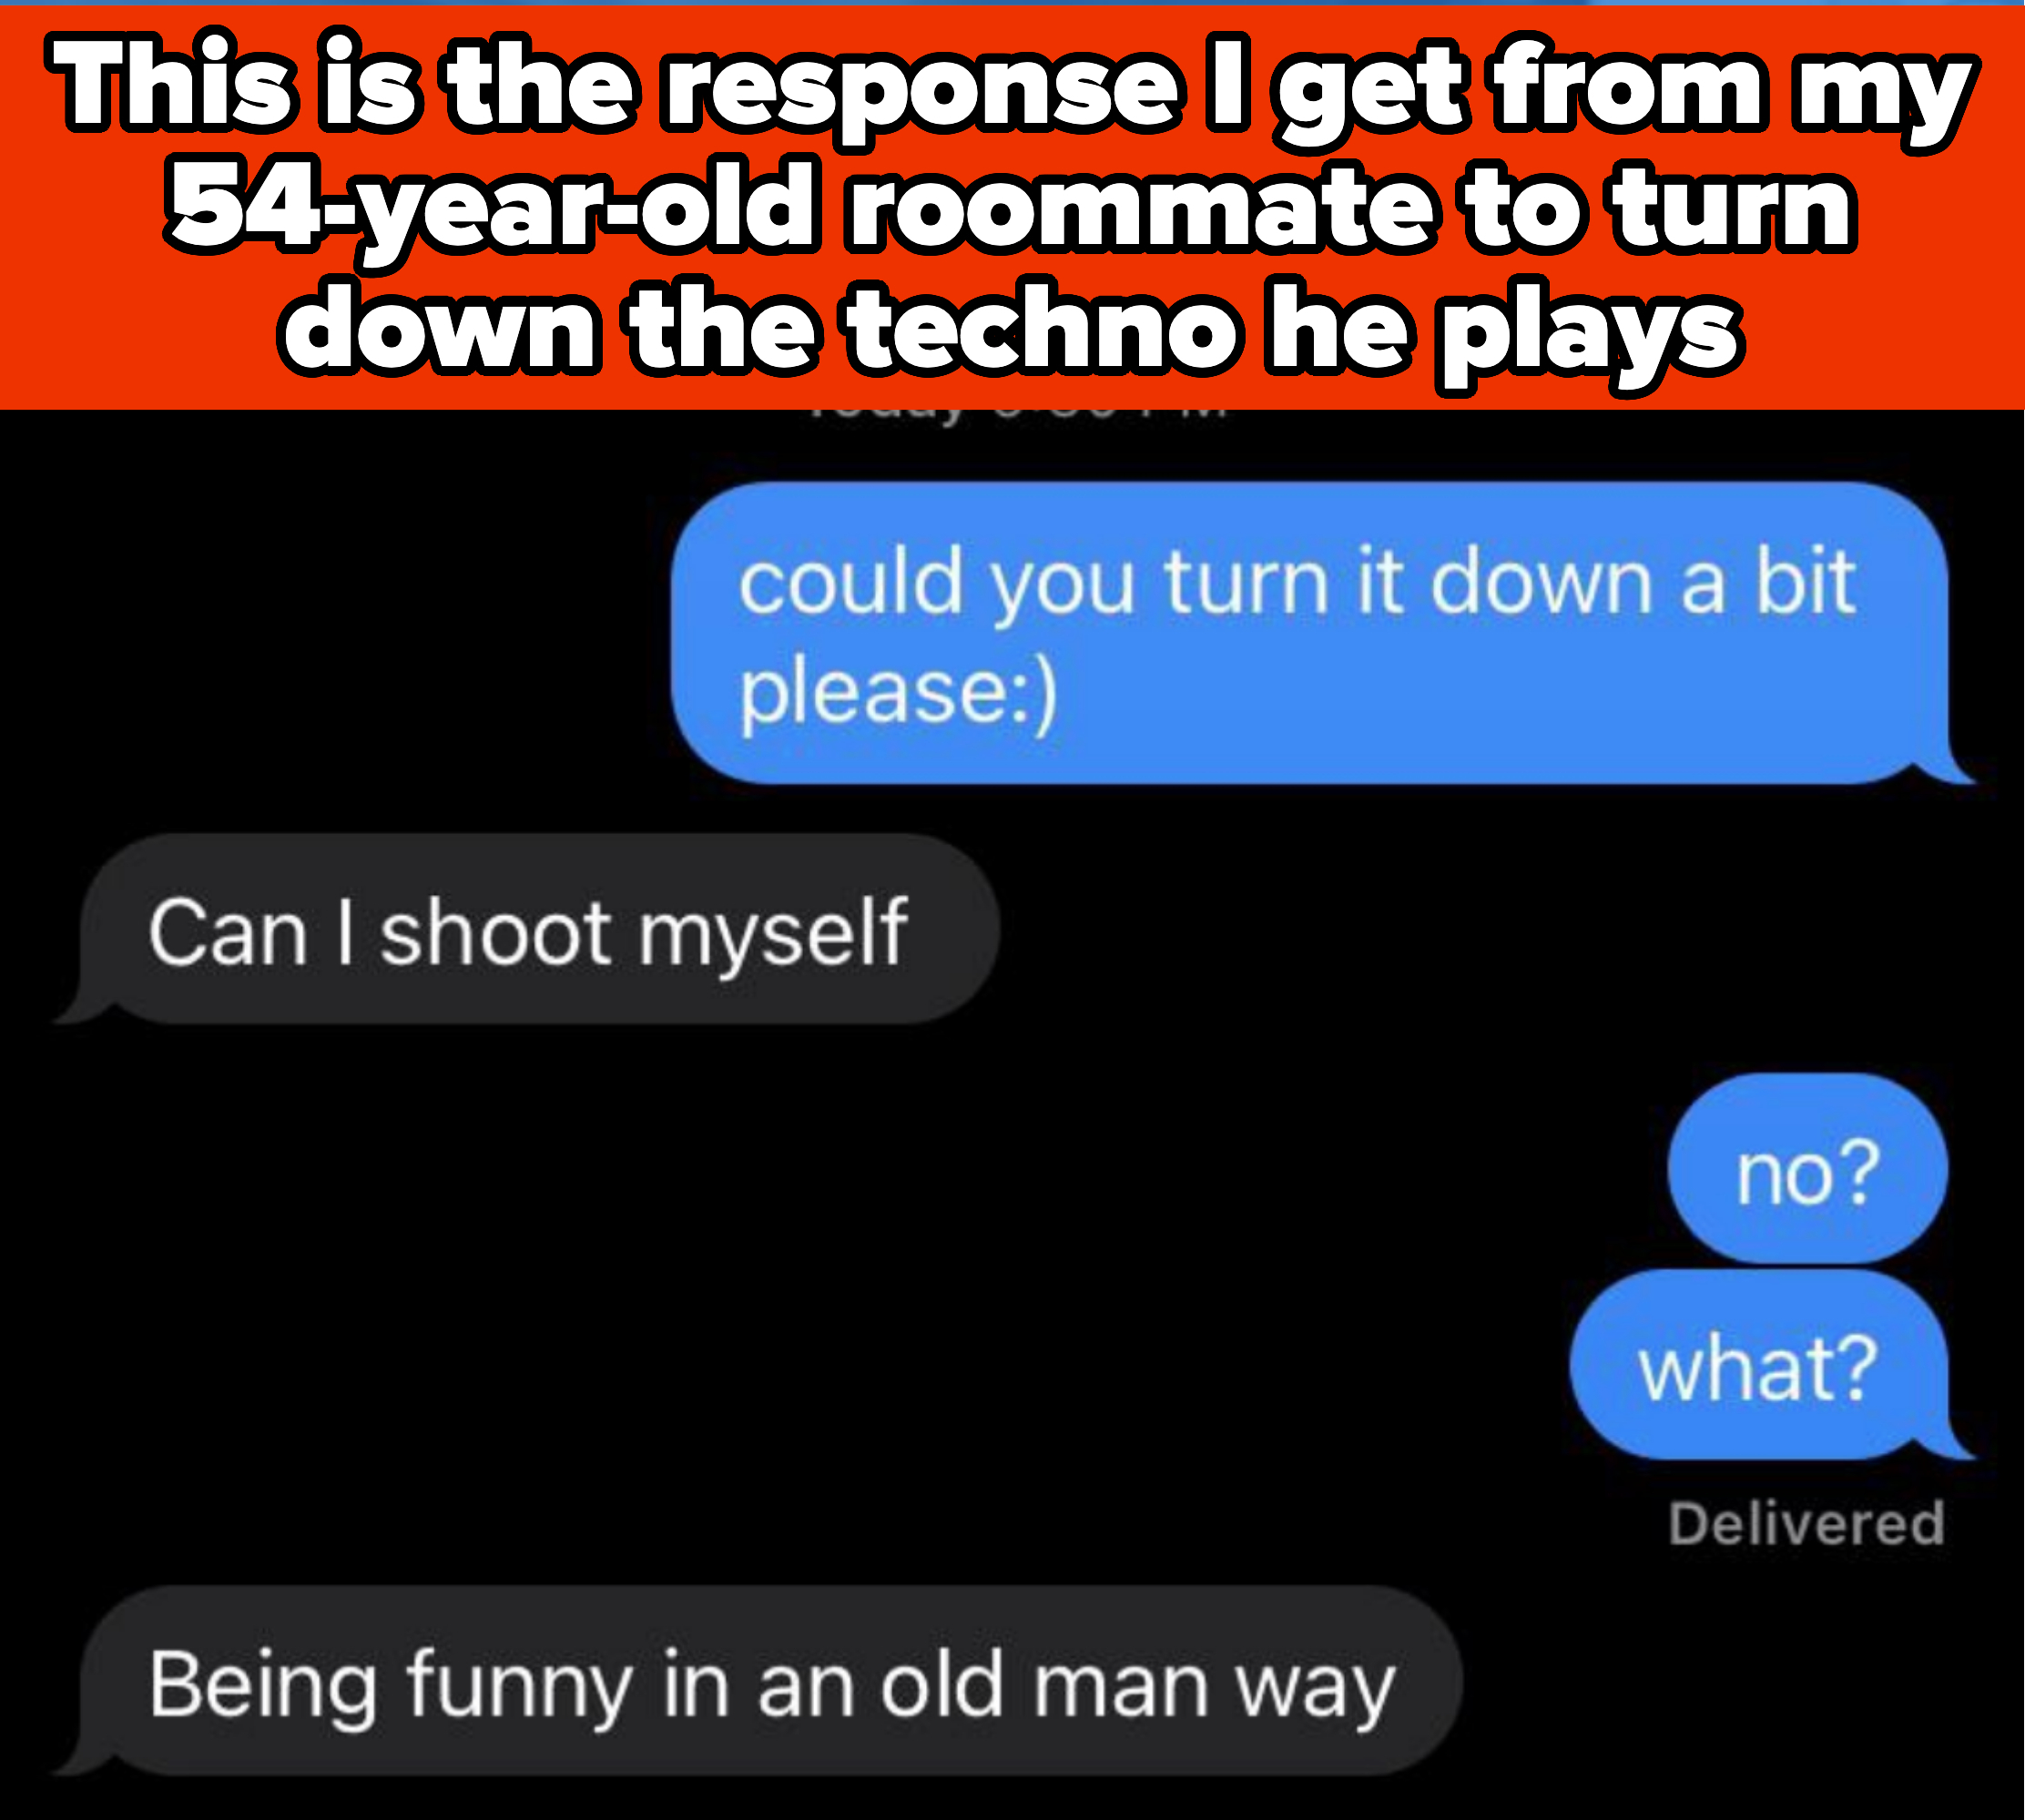 54 year old roommate asks if they can shoot themselves in response to being asked to turn down the music